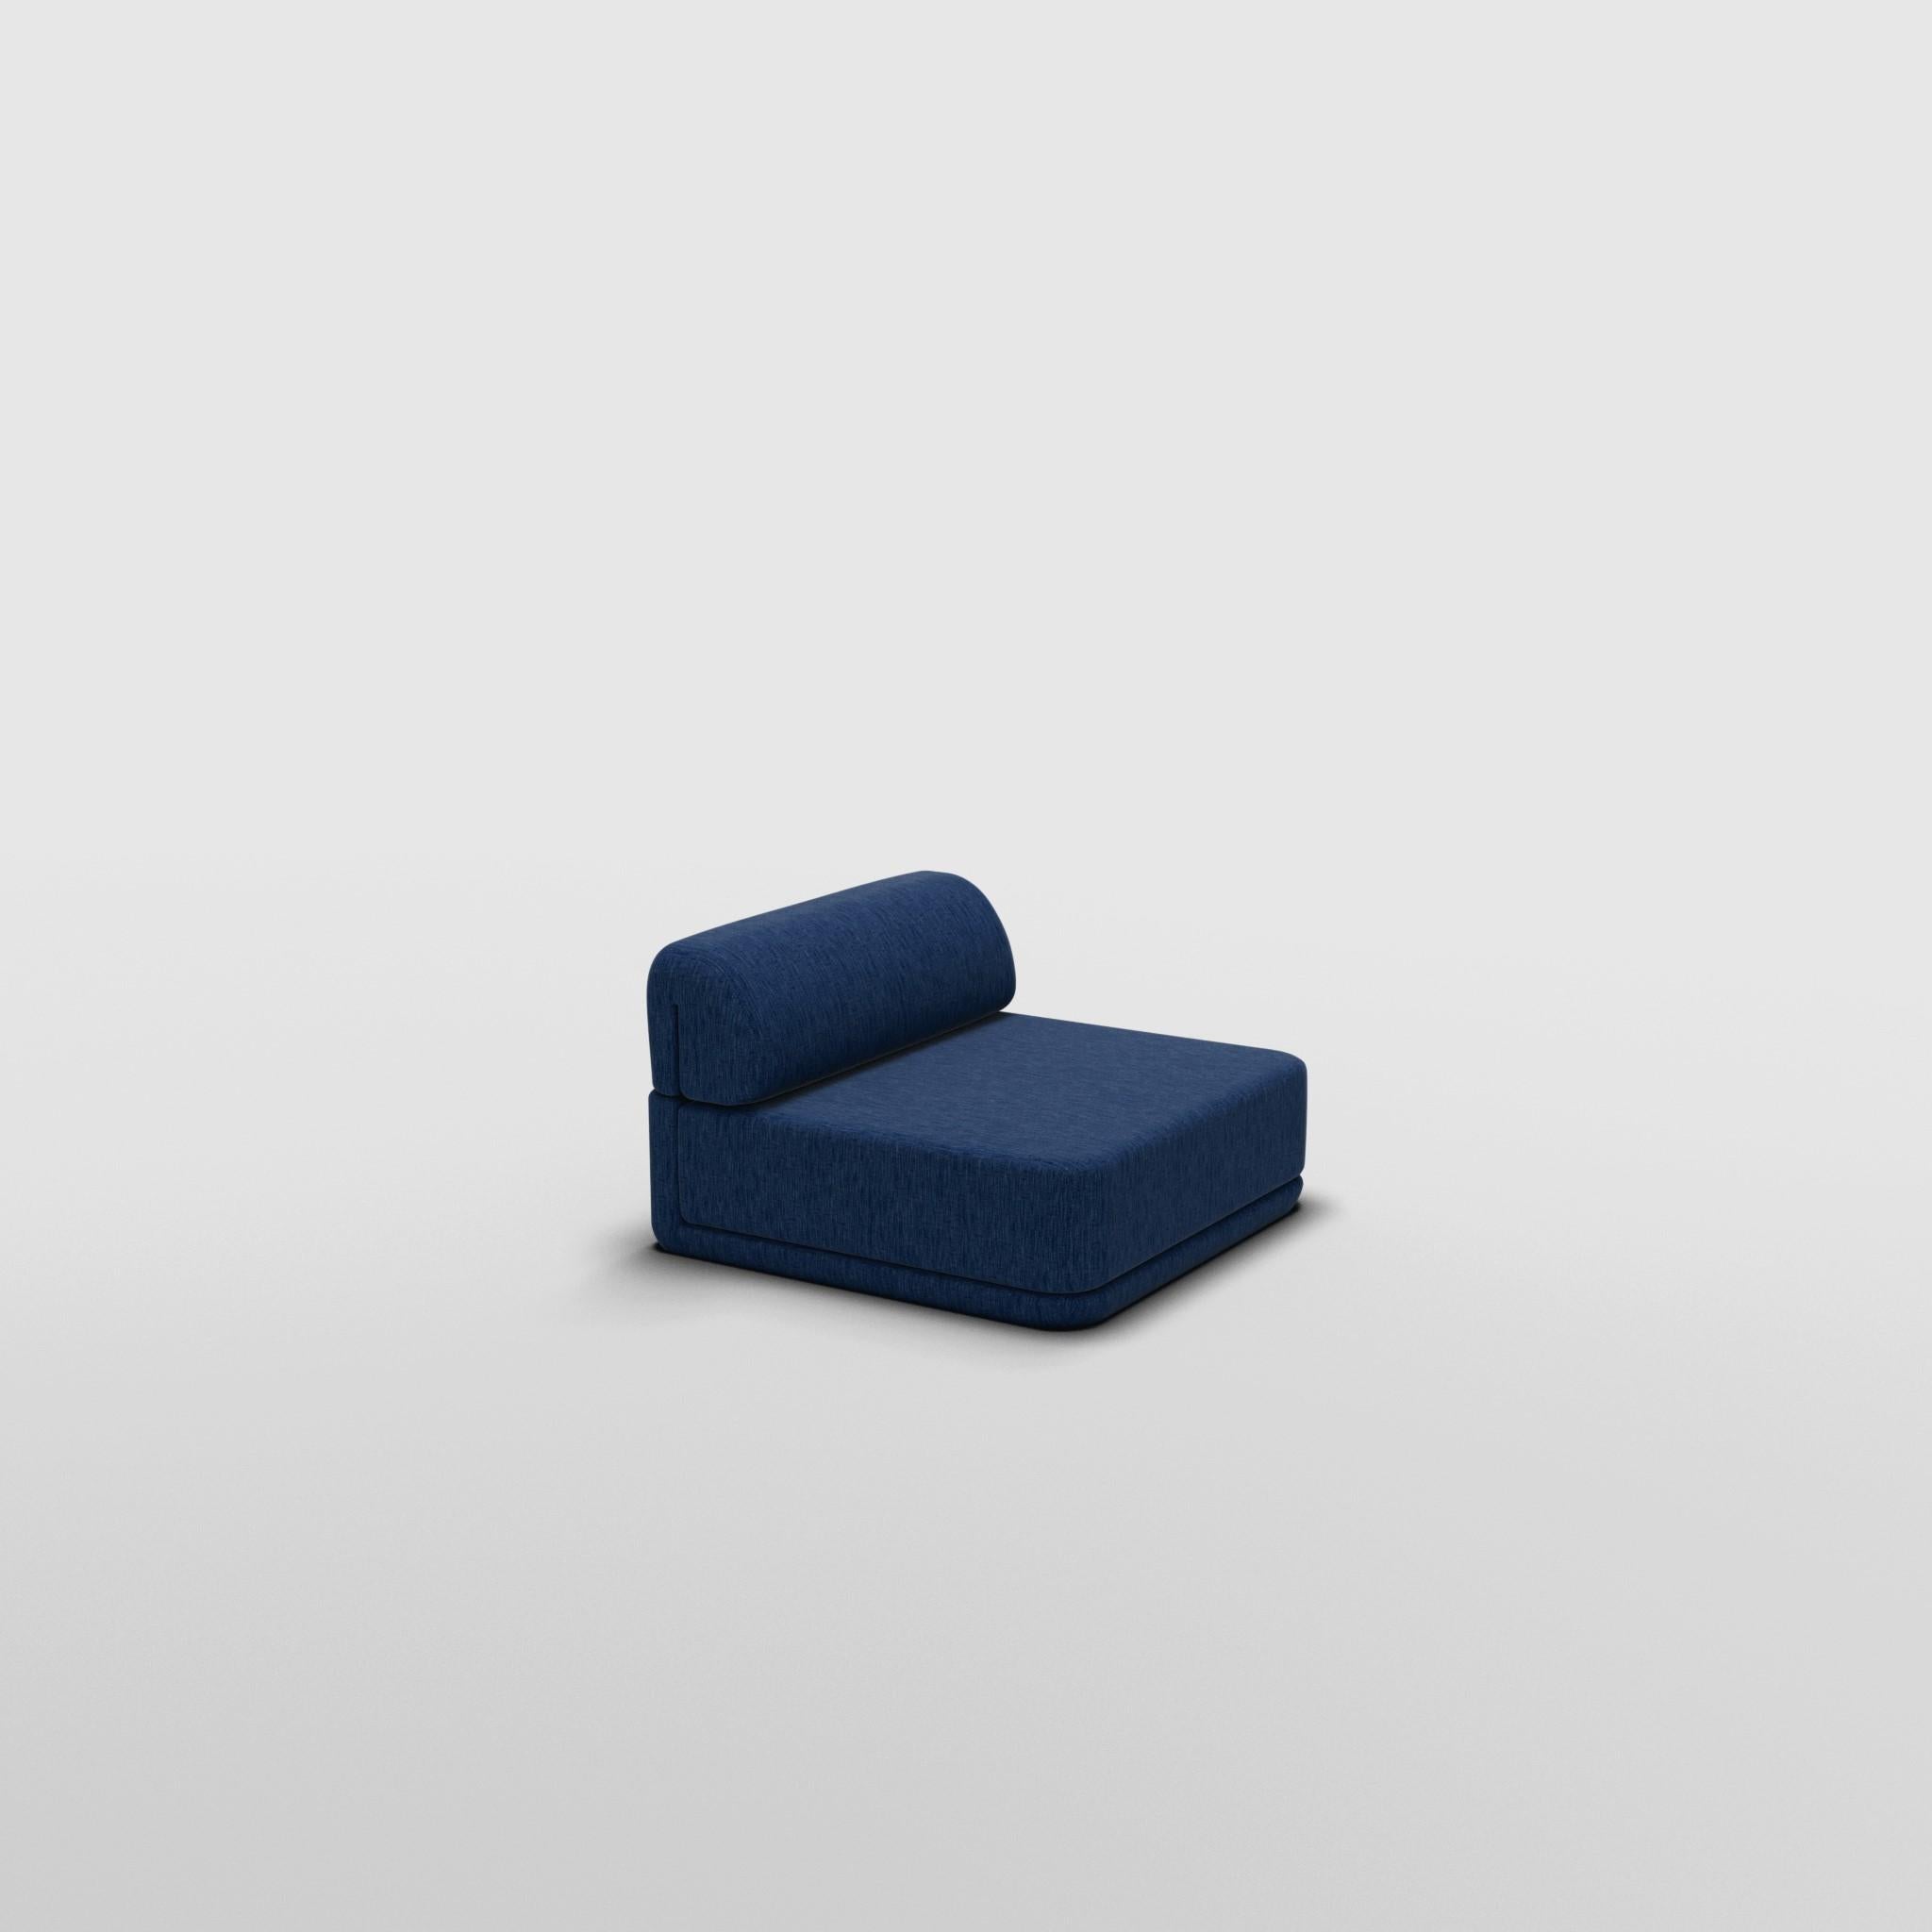 Contemporary The Cube Sofa - Cube Lounge Seat For Sale